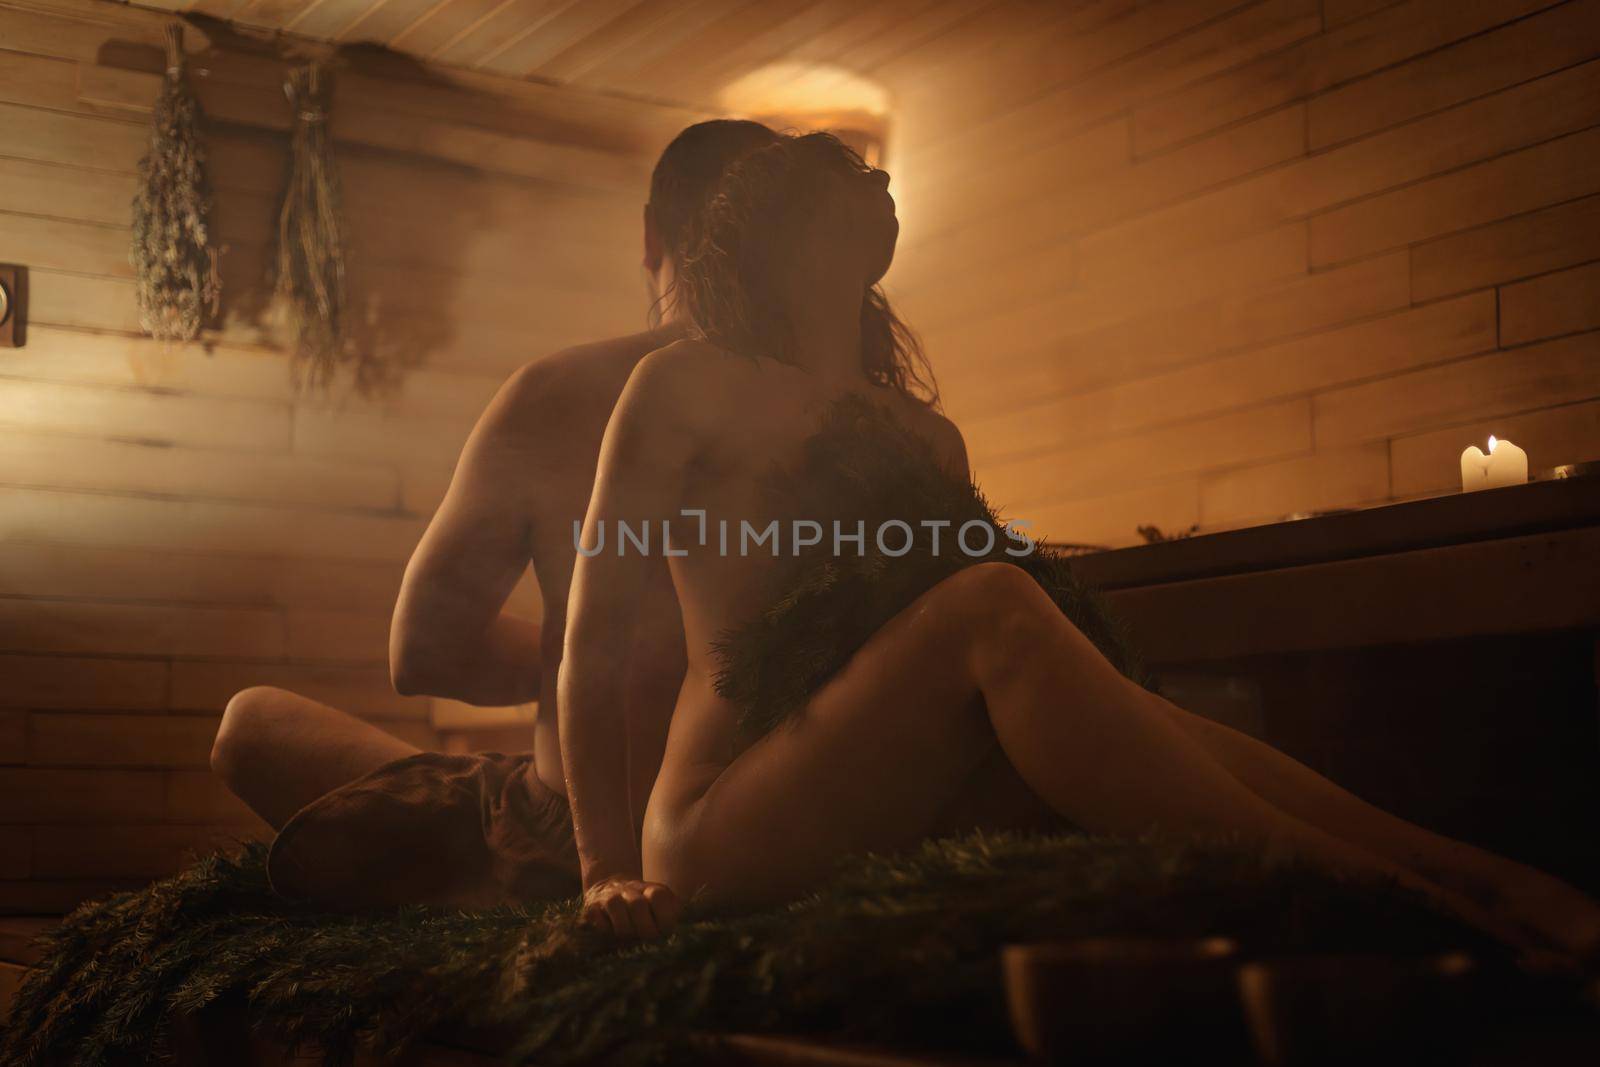 A married couple conducts healing therapy in the sauna.